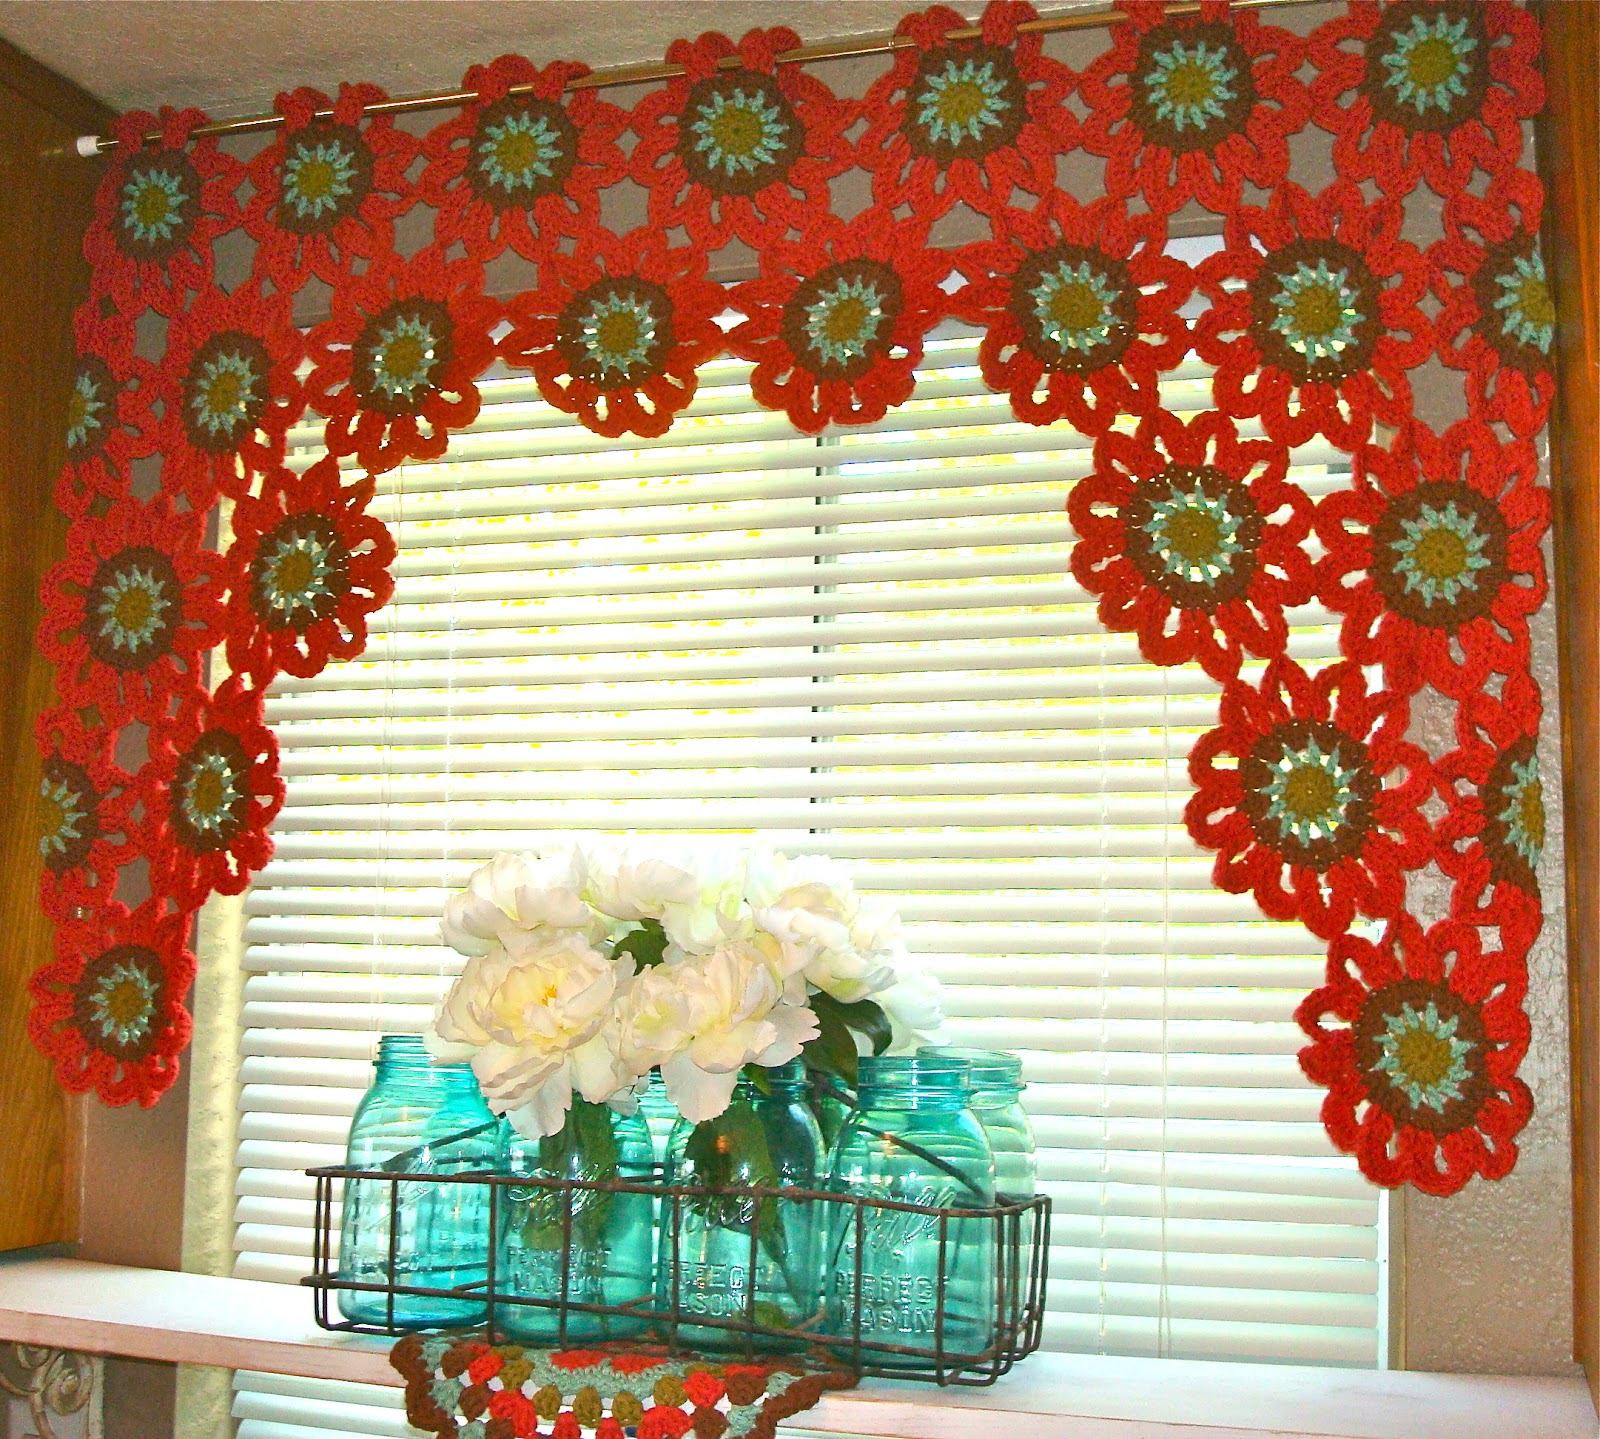 Make Your Bare Window Look Beautiful with Crochet Curtains